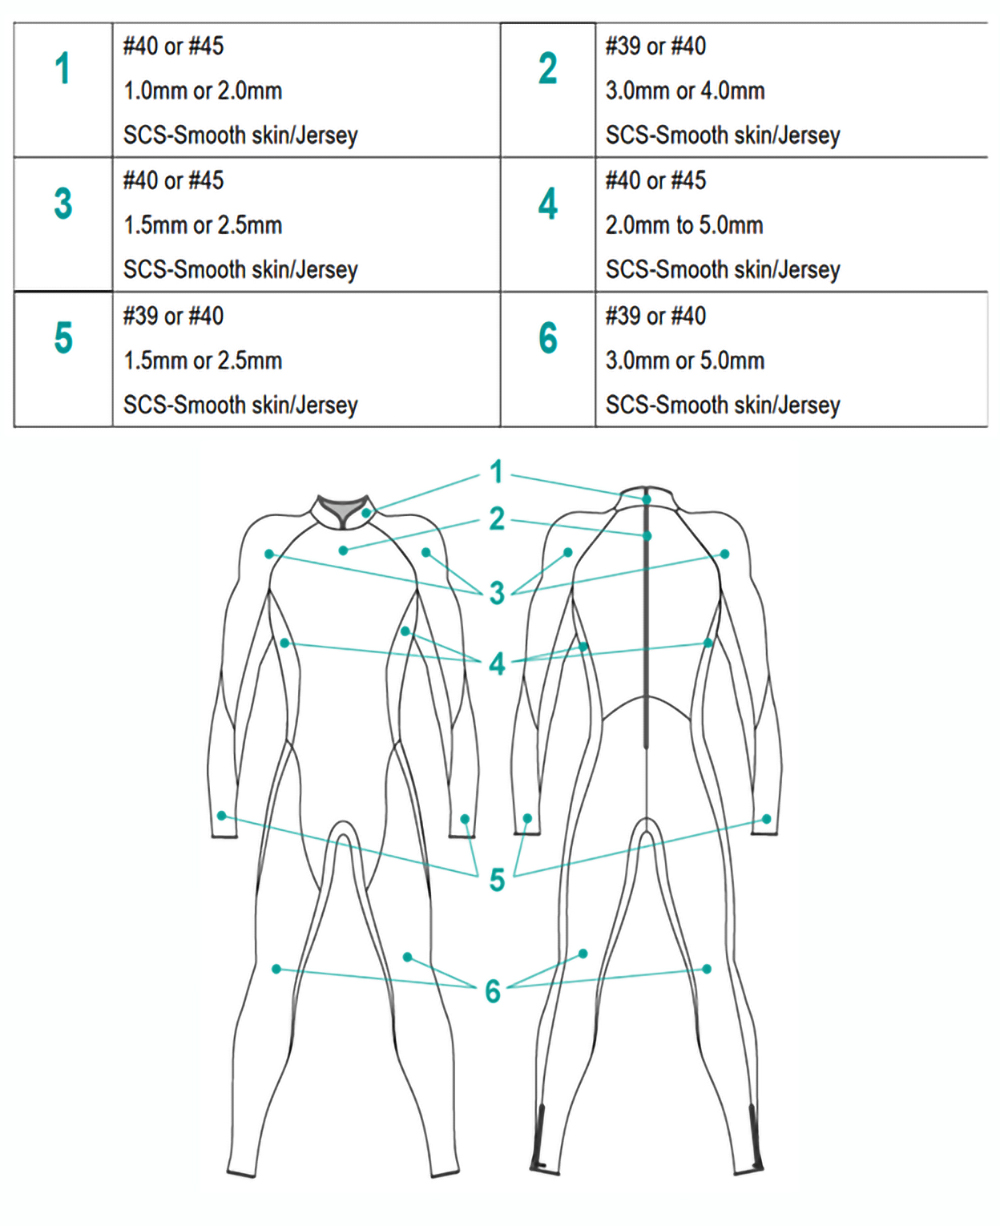 Wetsuit feature - How to use Yamamoto material for triathlon wetsuit?cid=16